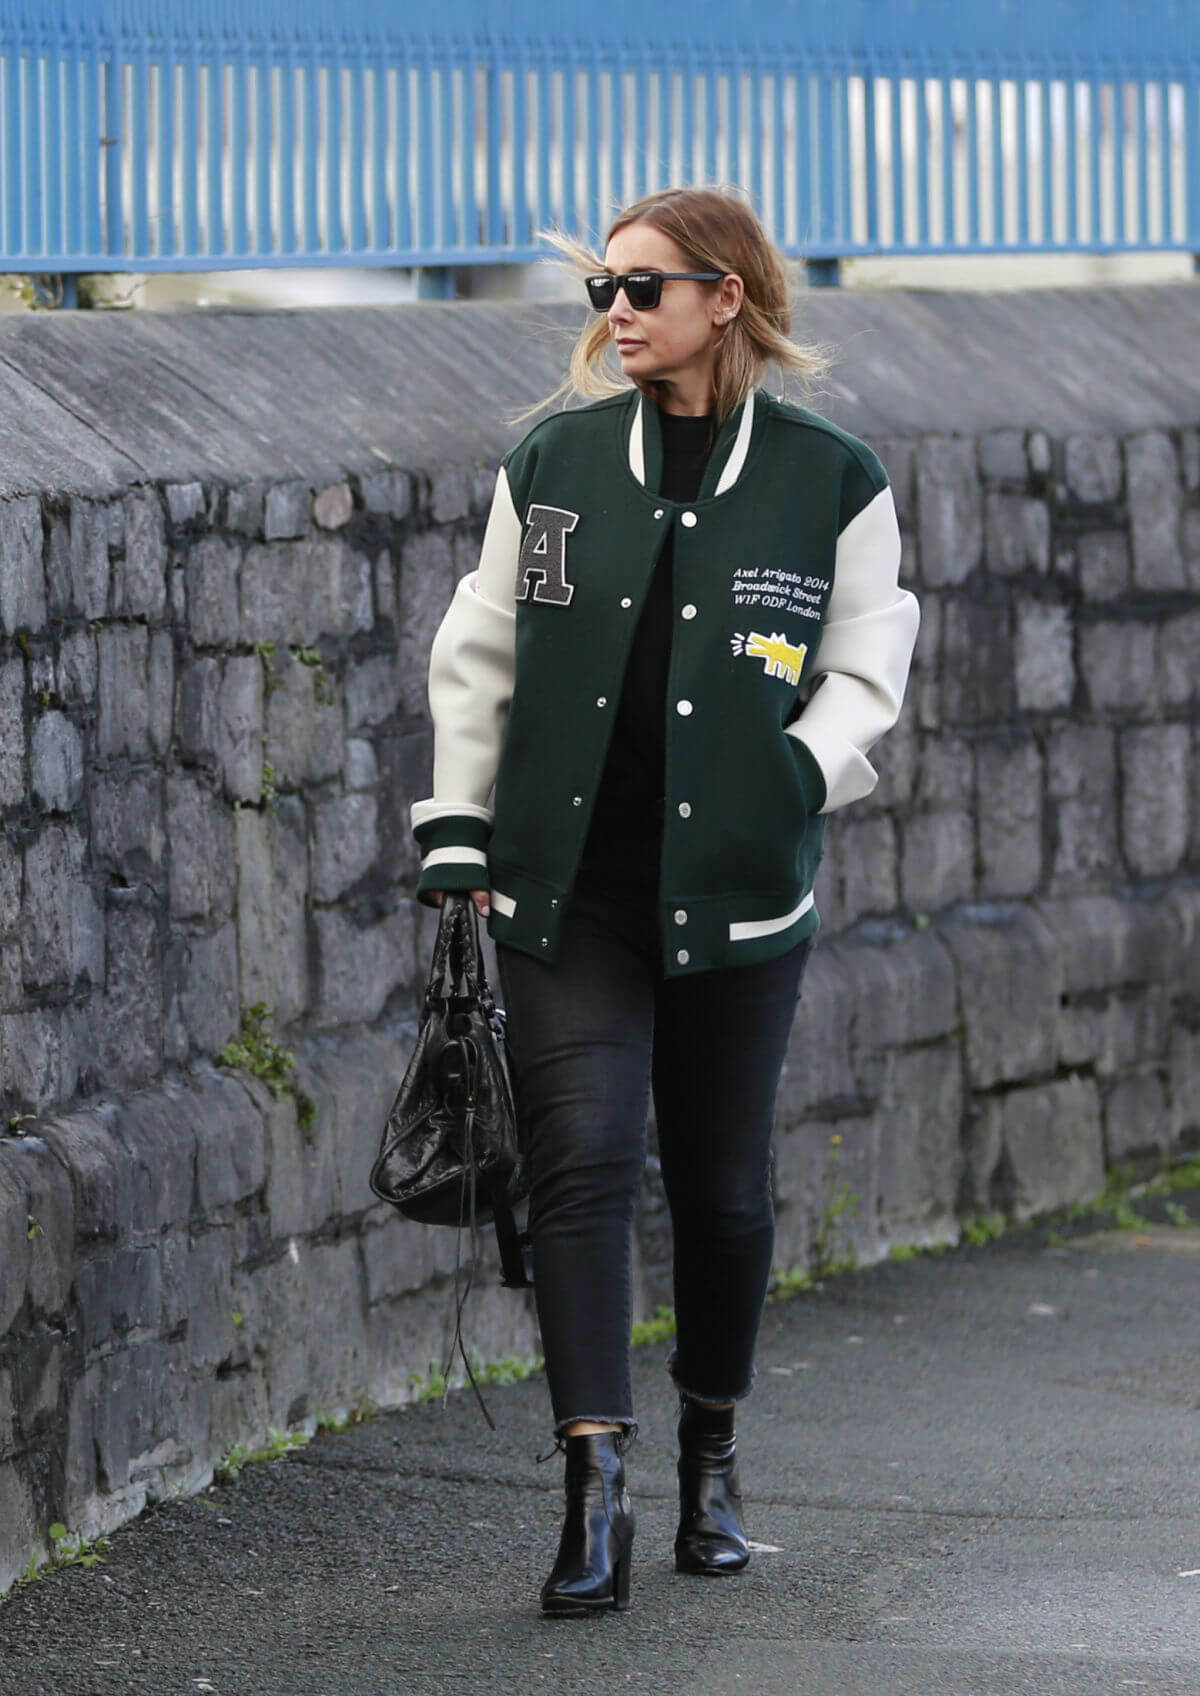 Louise Redknapp in Green White Jacket and Black Denim Day Out and About in Plymouth 2